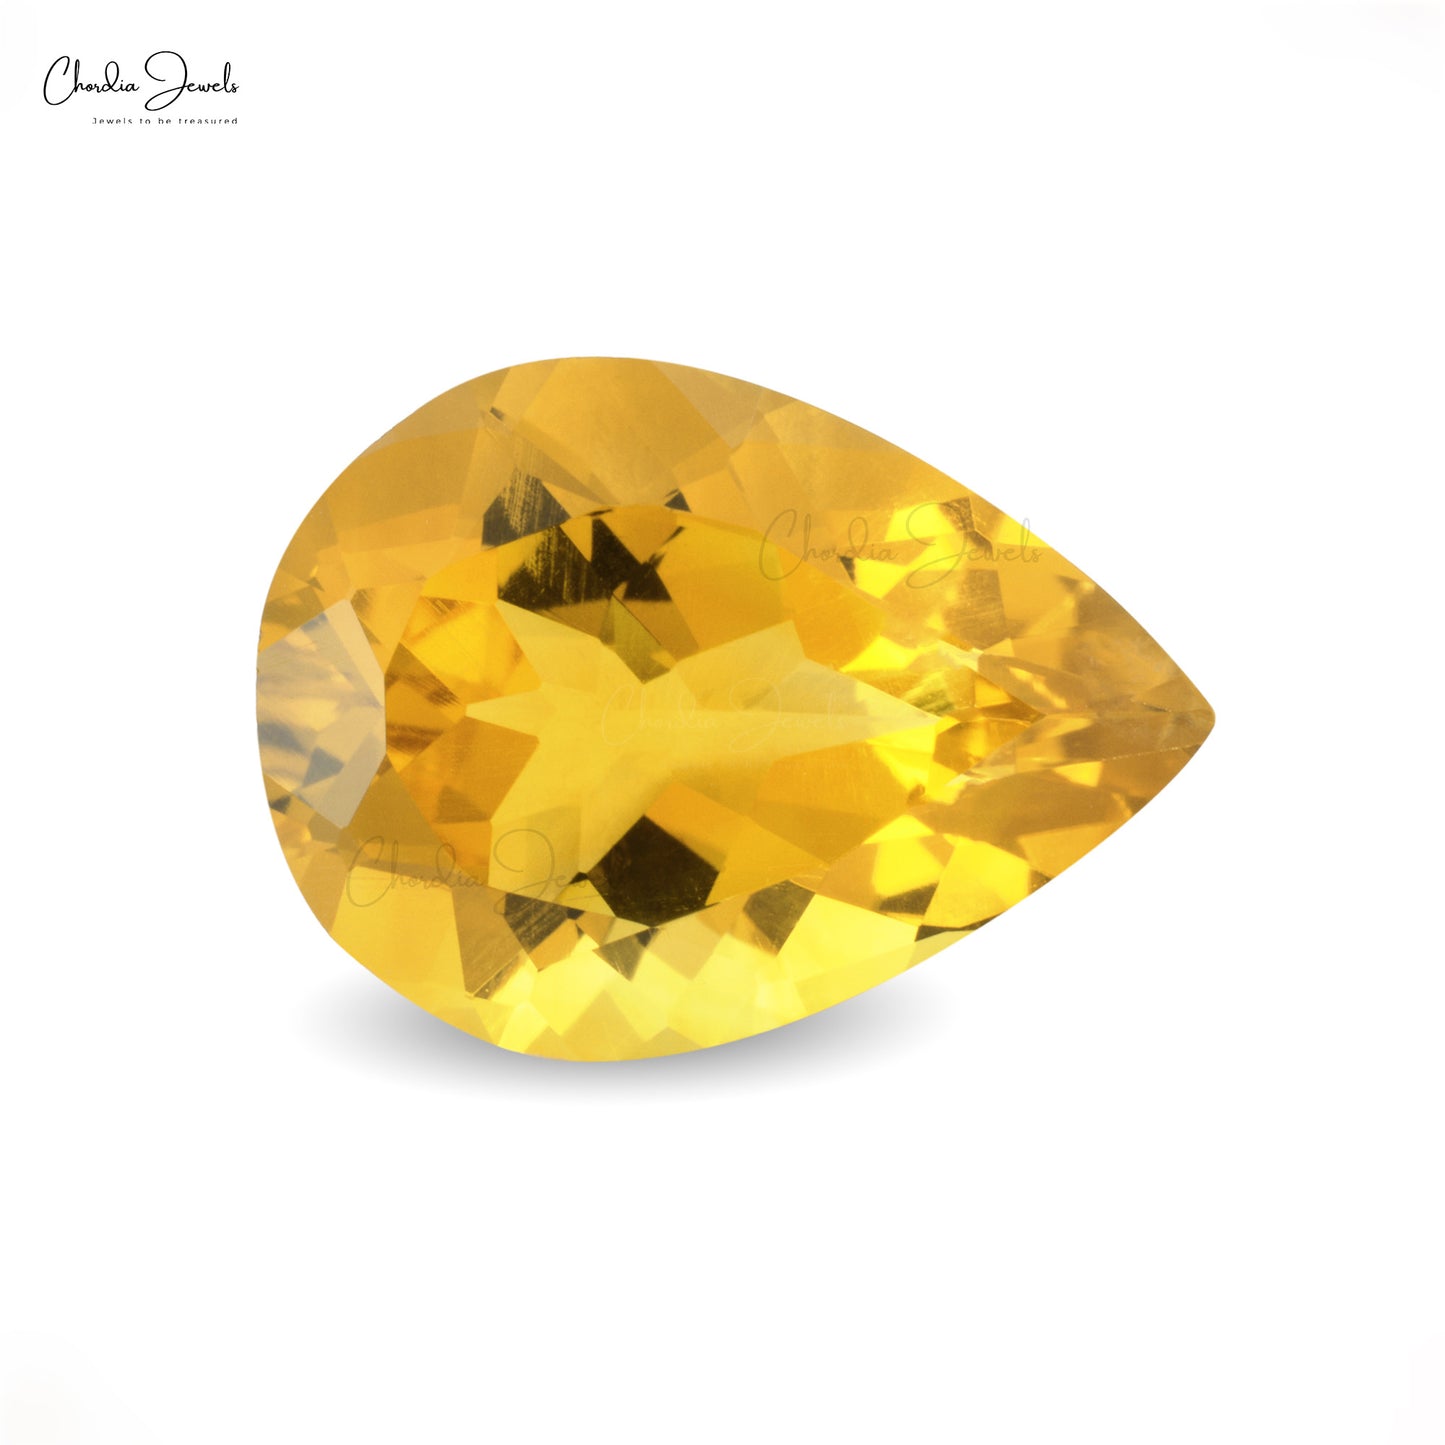 High Quality Citrine 5x3 MM Pear Cut Gemstone for Engagement Ring, 1 piece